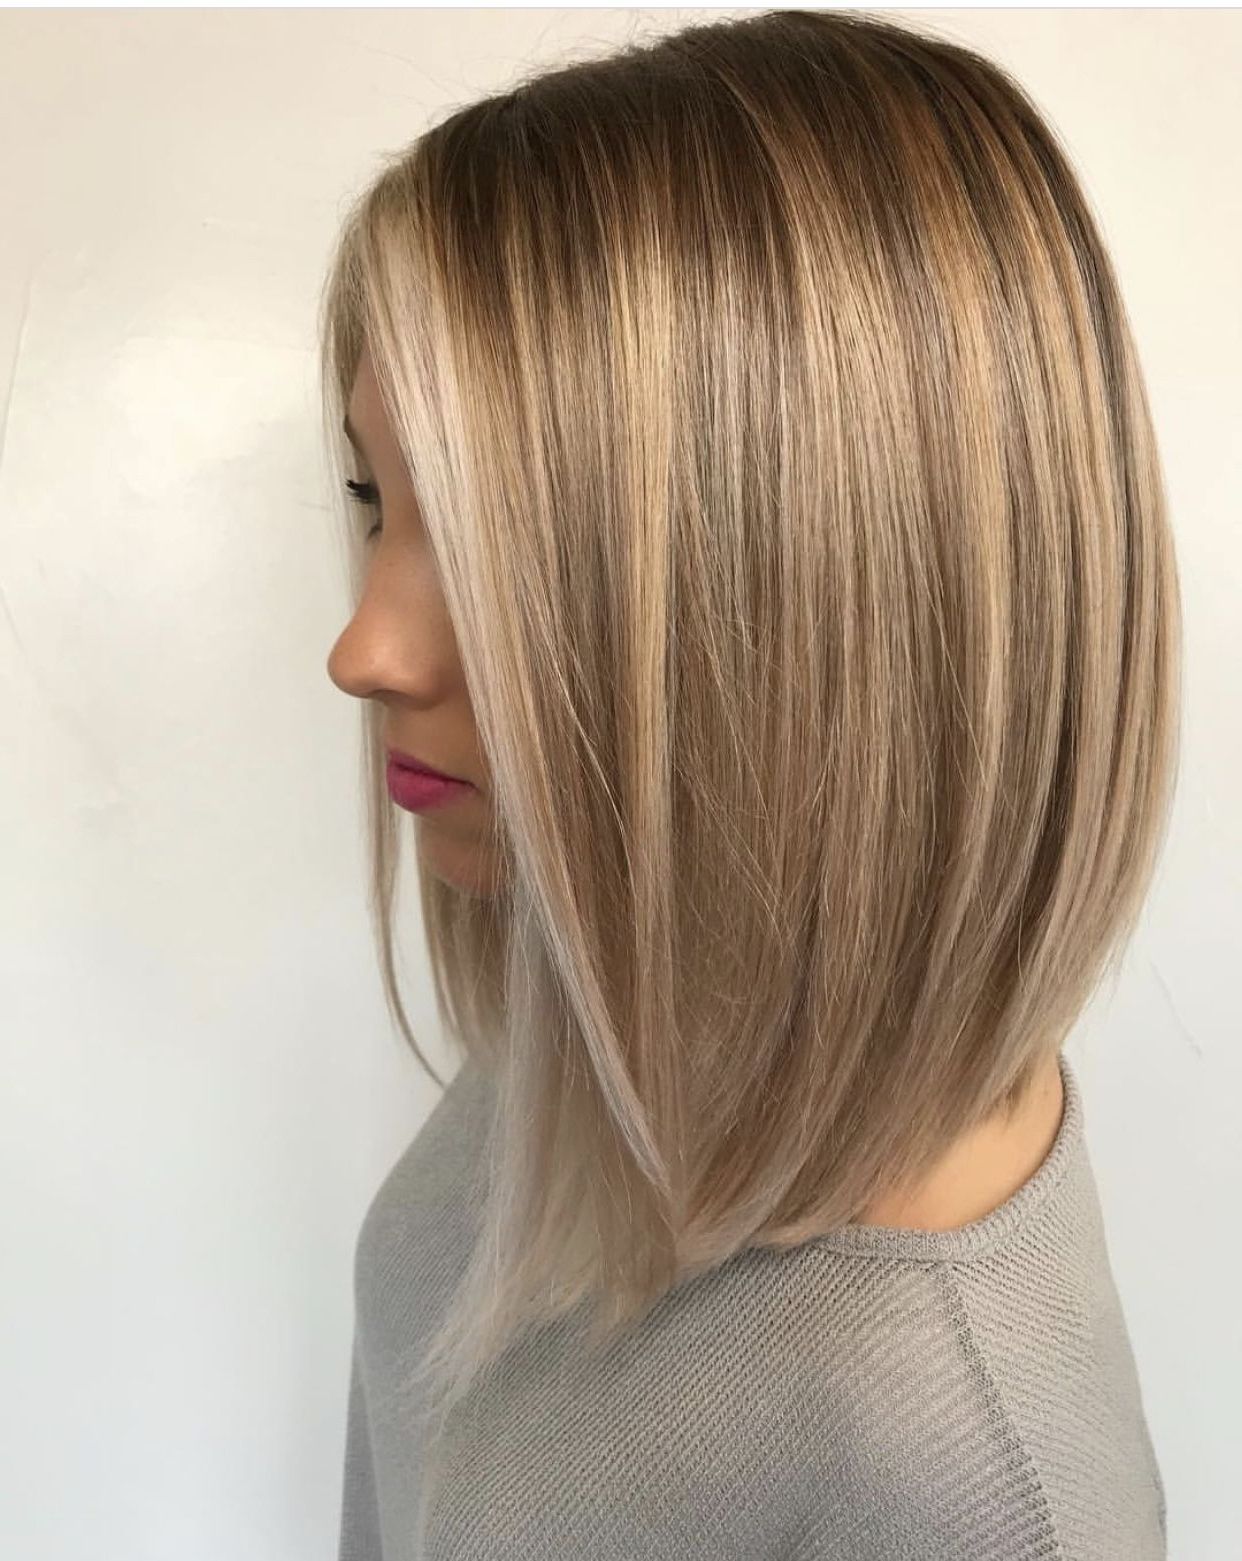 Most Recent Dirty Blonde Bob Hairstyles Throughout Long Bob Haircut, Blonde Hair Color, Dirty Blonde Color, Stylish (Gallery 1 of 20)